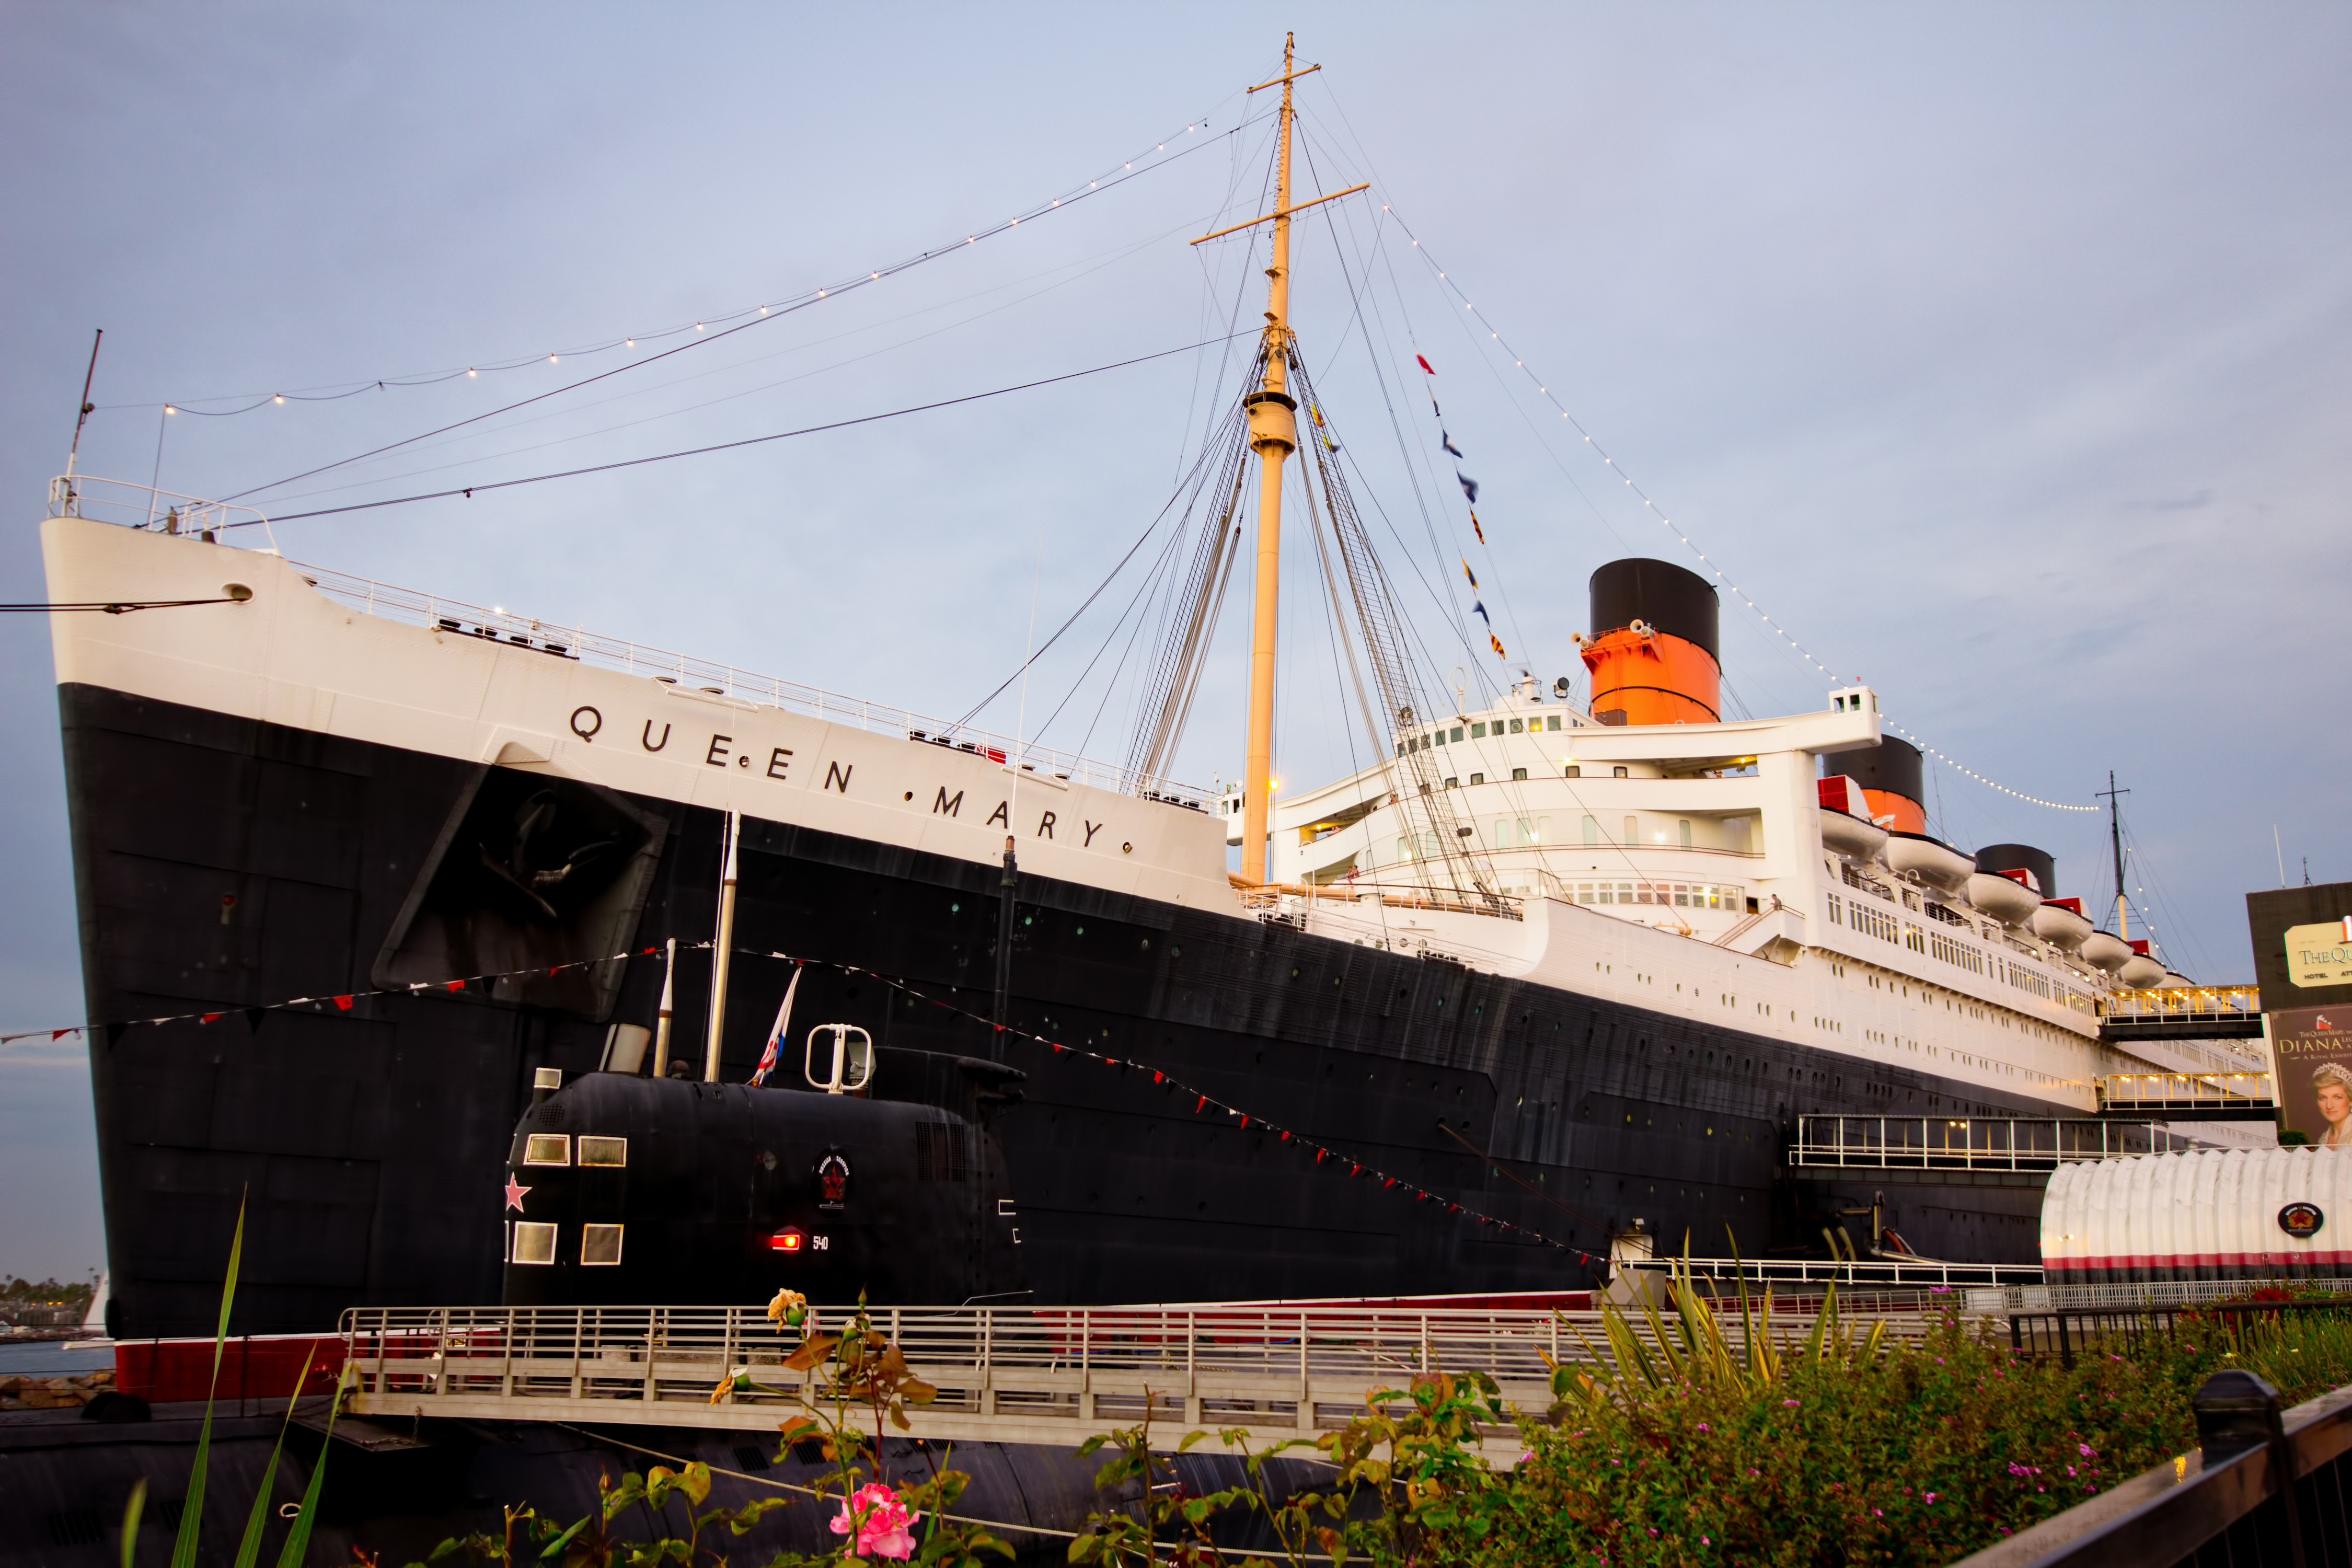 Historic Queen Mary in Long Beach